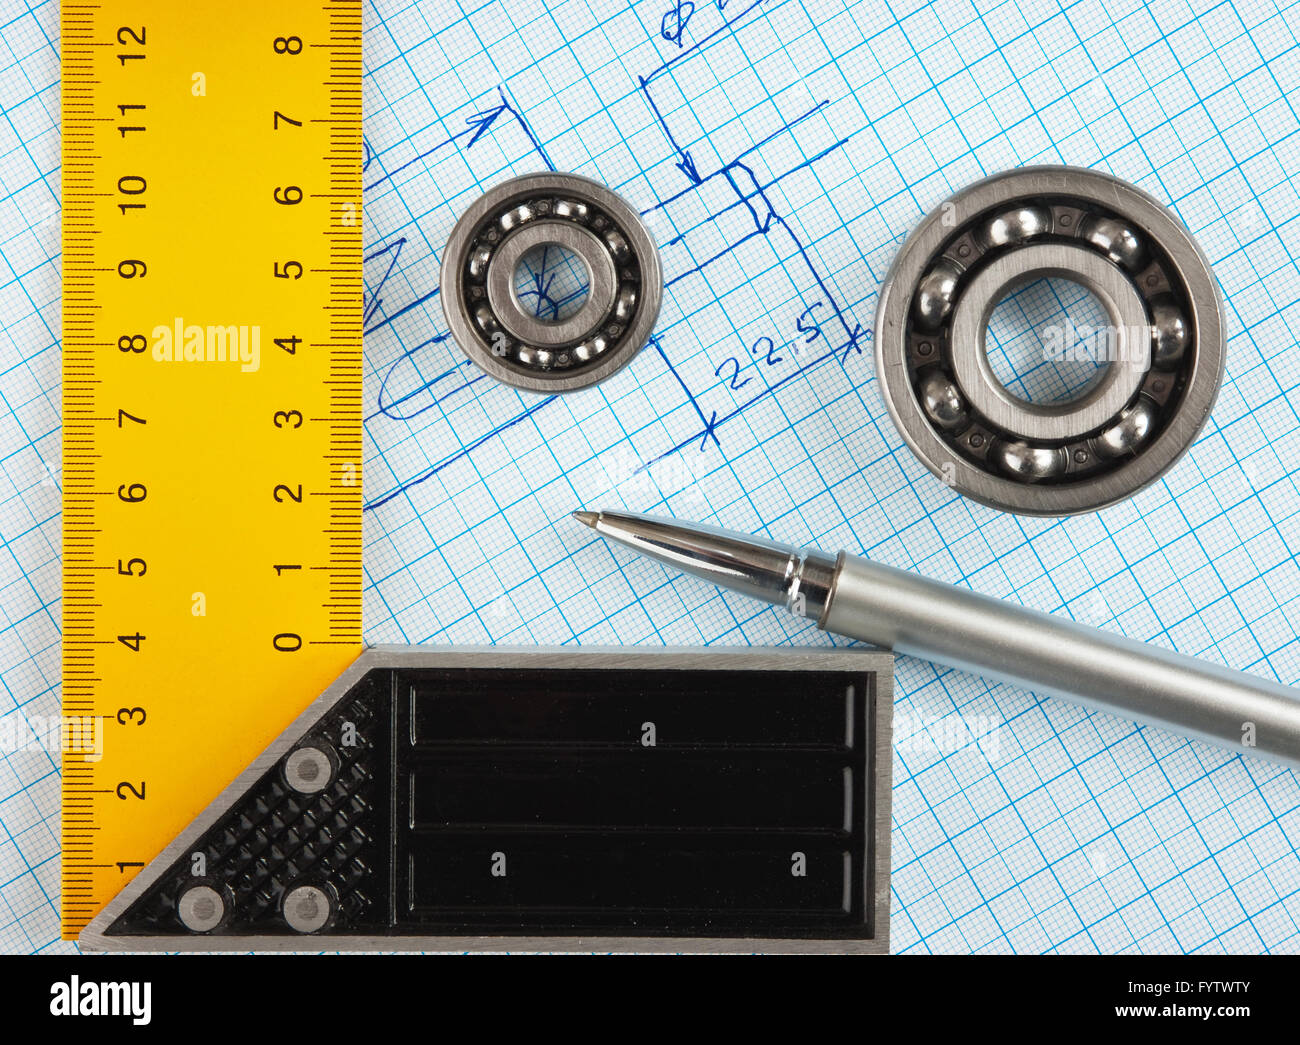 Technical drawing and setsquare Stock Photo